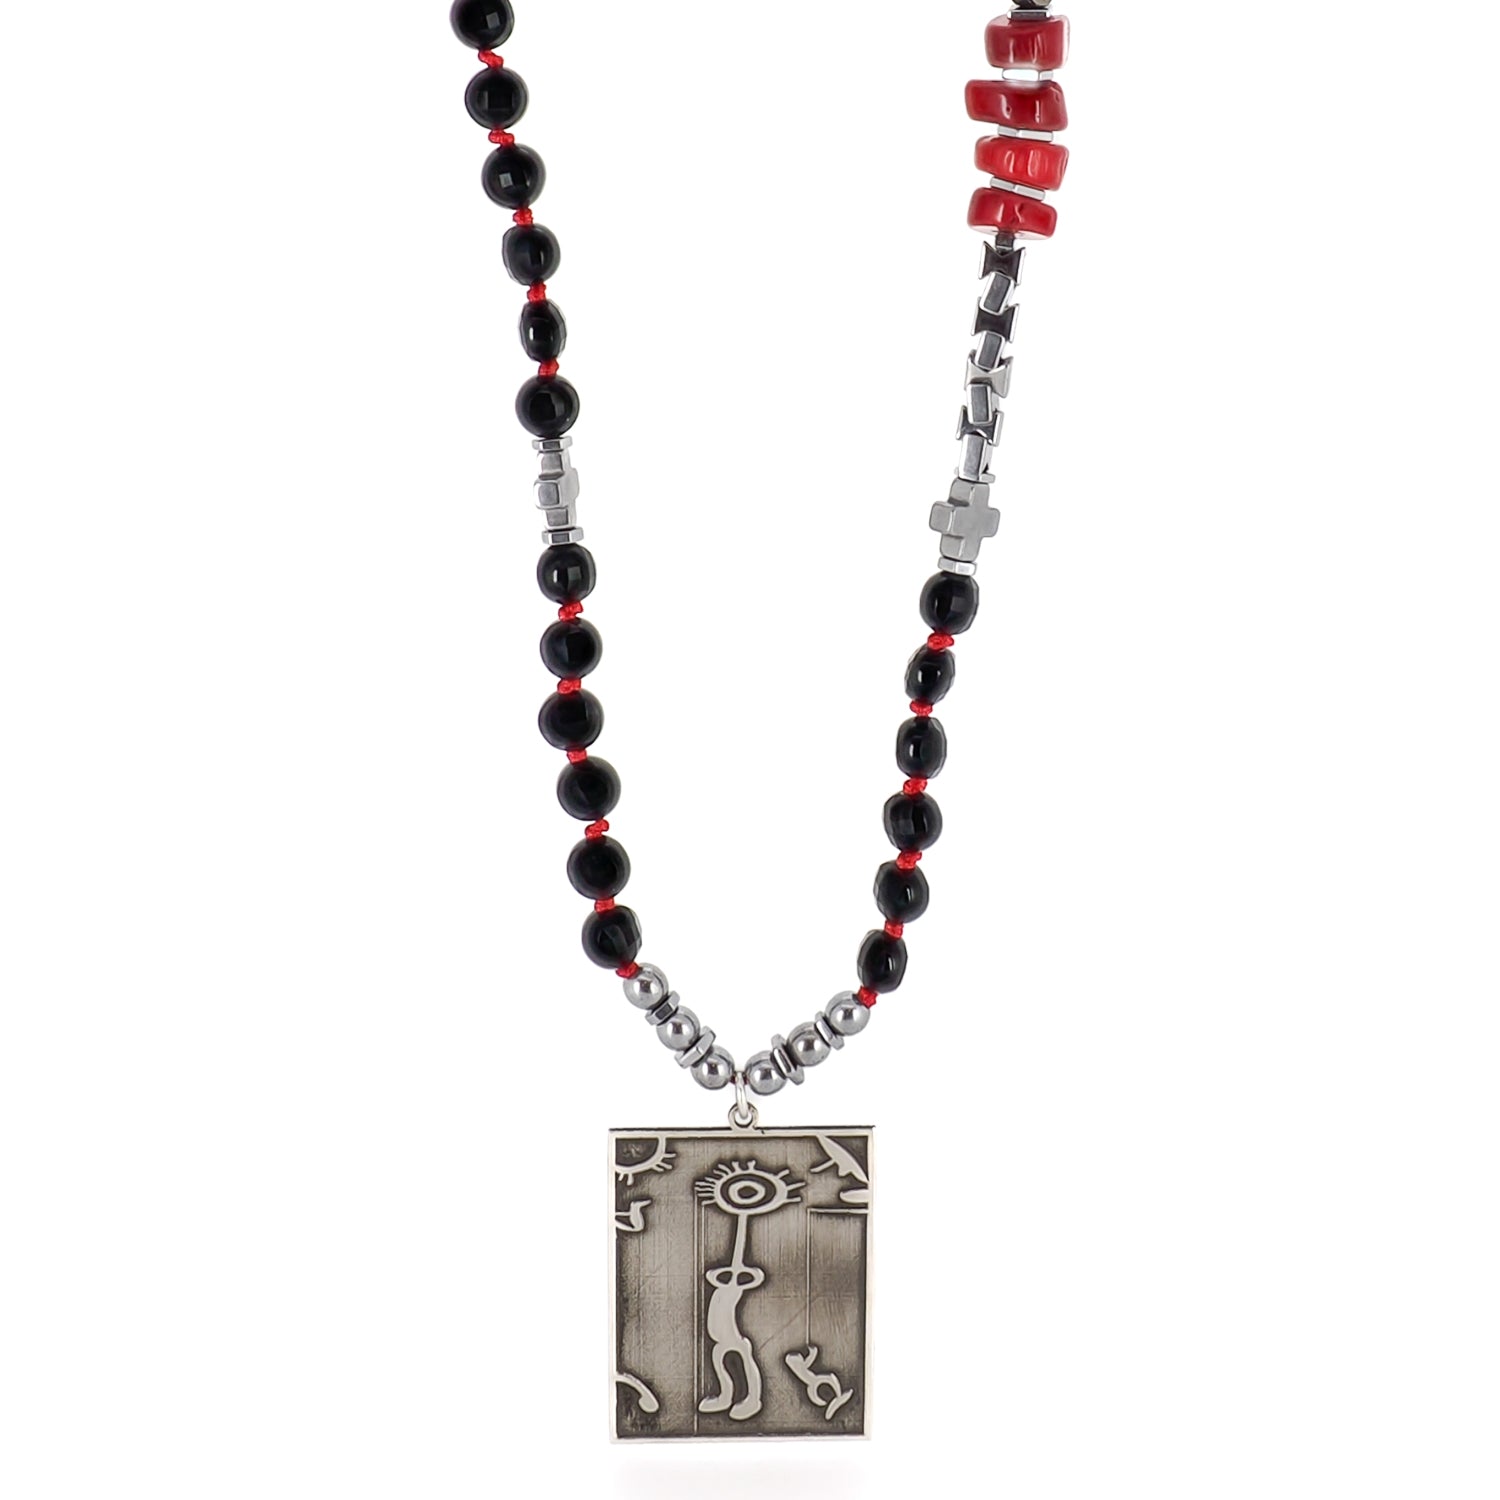 Shamanic Spirit Onyx Necklace - Handcrafted with Onyx stone and silver symbols.